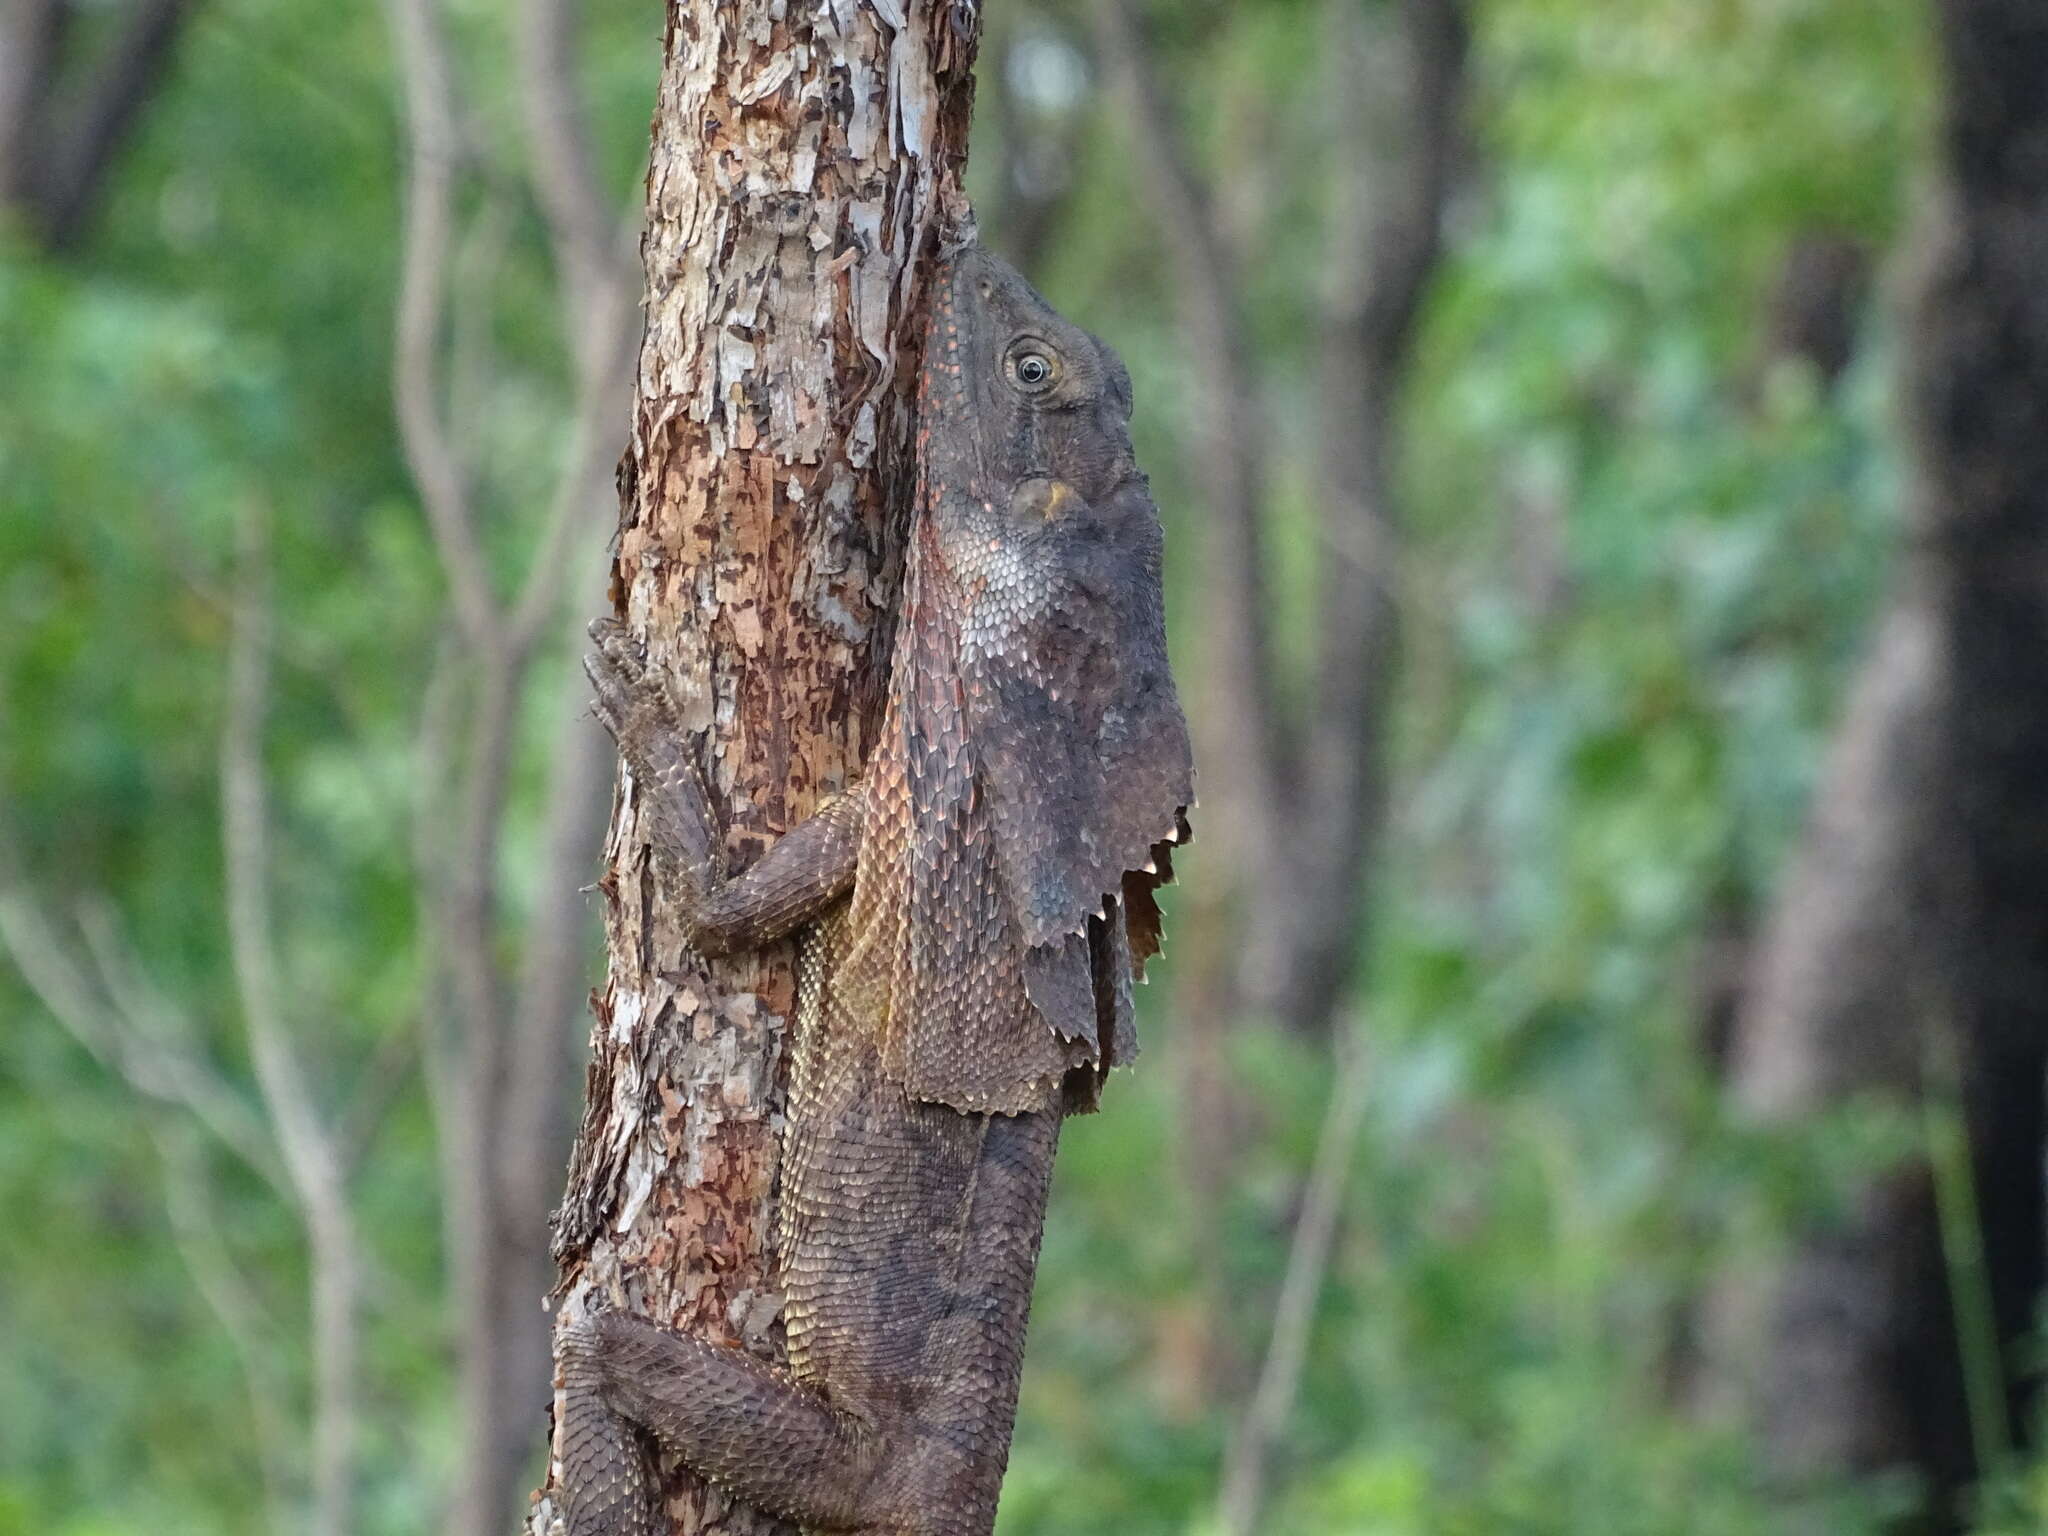 Image of Frilled Lizard